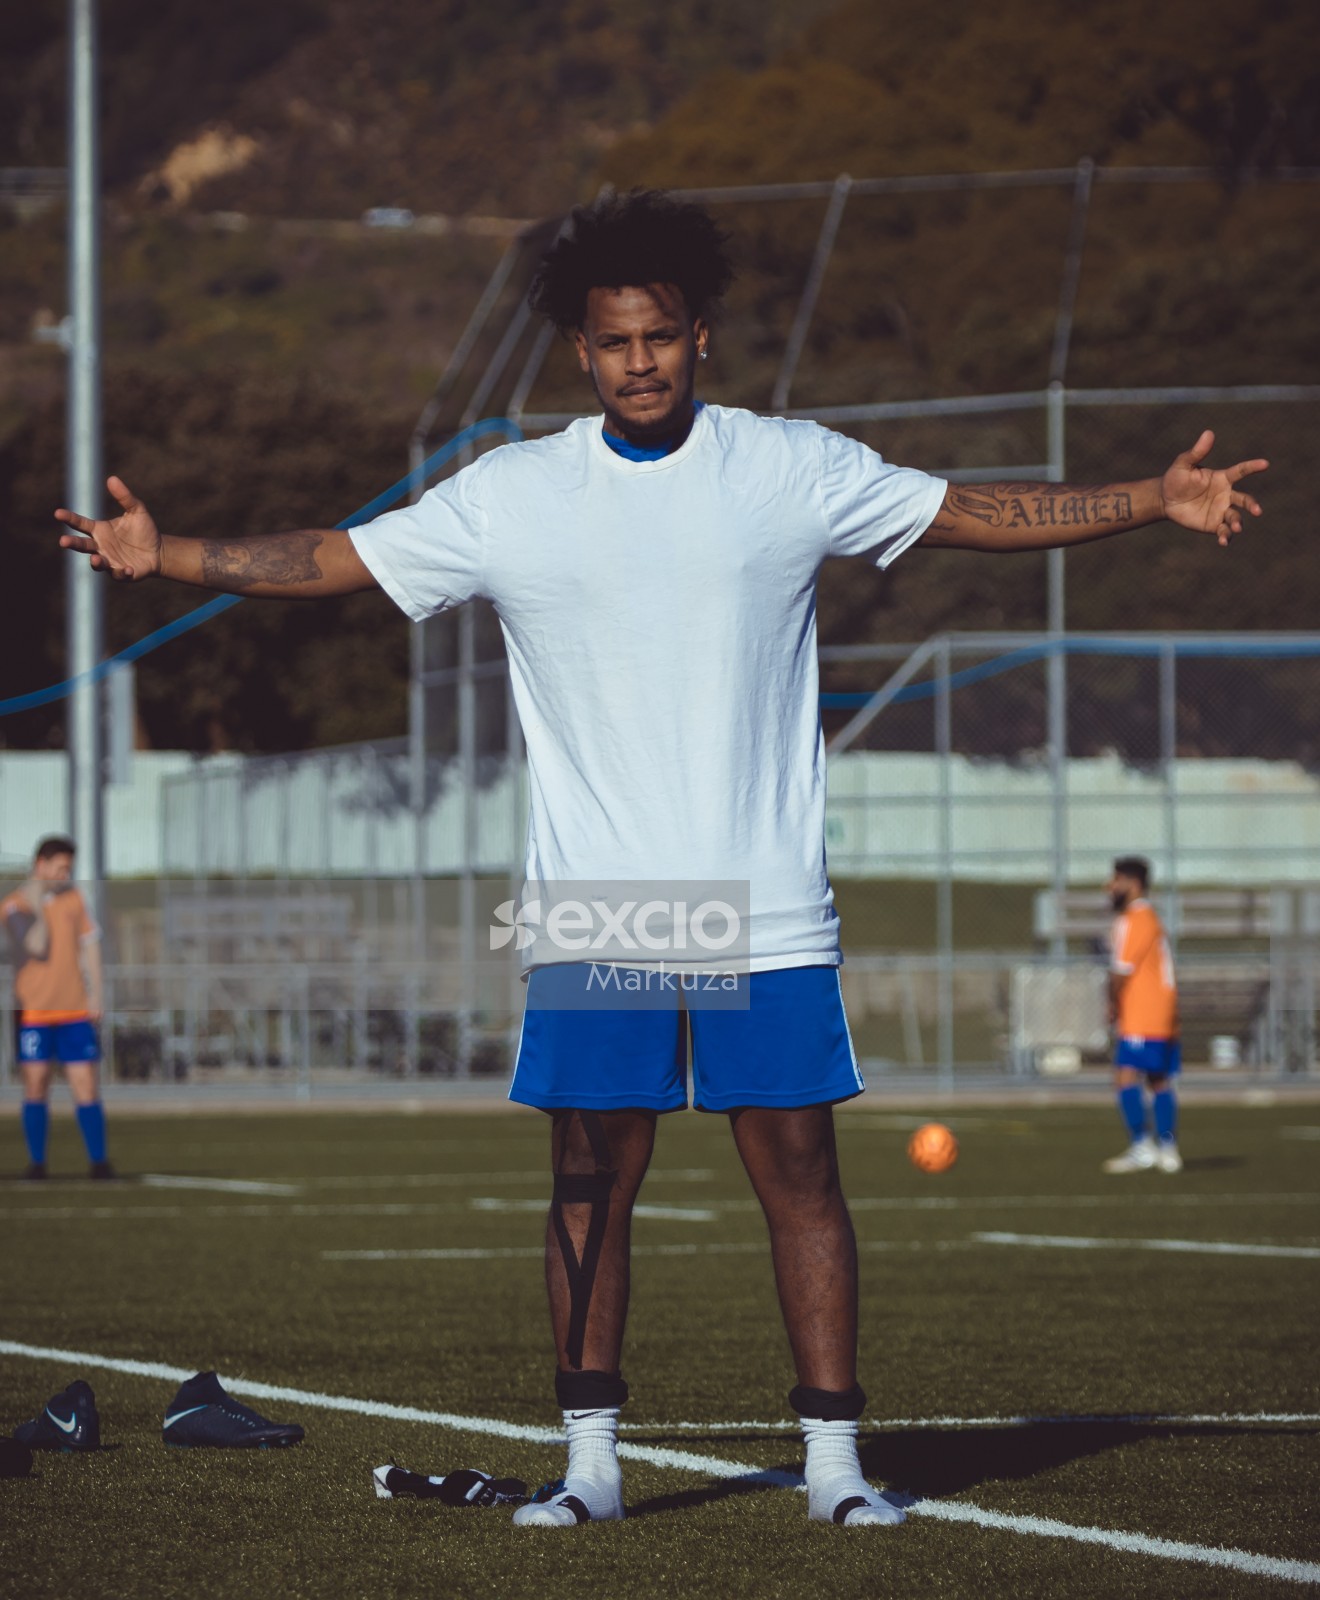 Tattooed football player in white shirt - Sports Zone sunday league